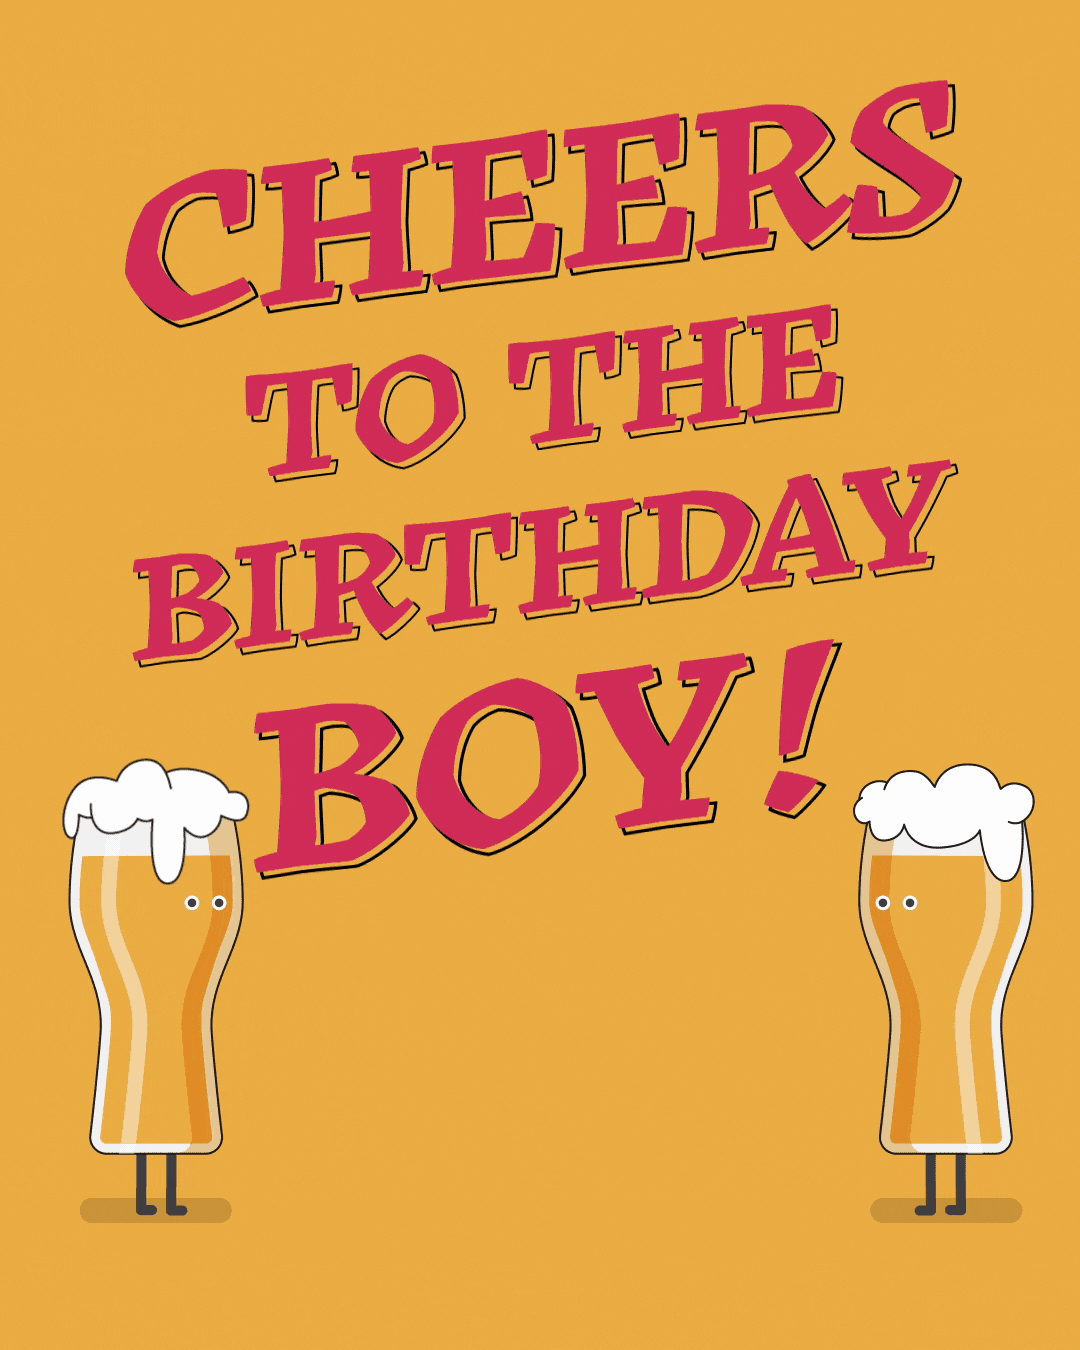 Cheers to the Birthday Boy Animated Images and GIFs